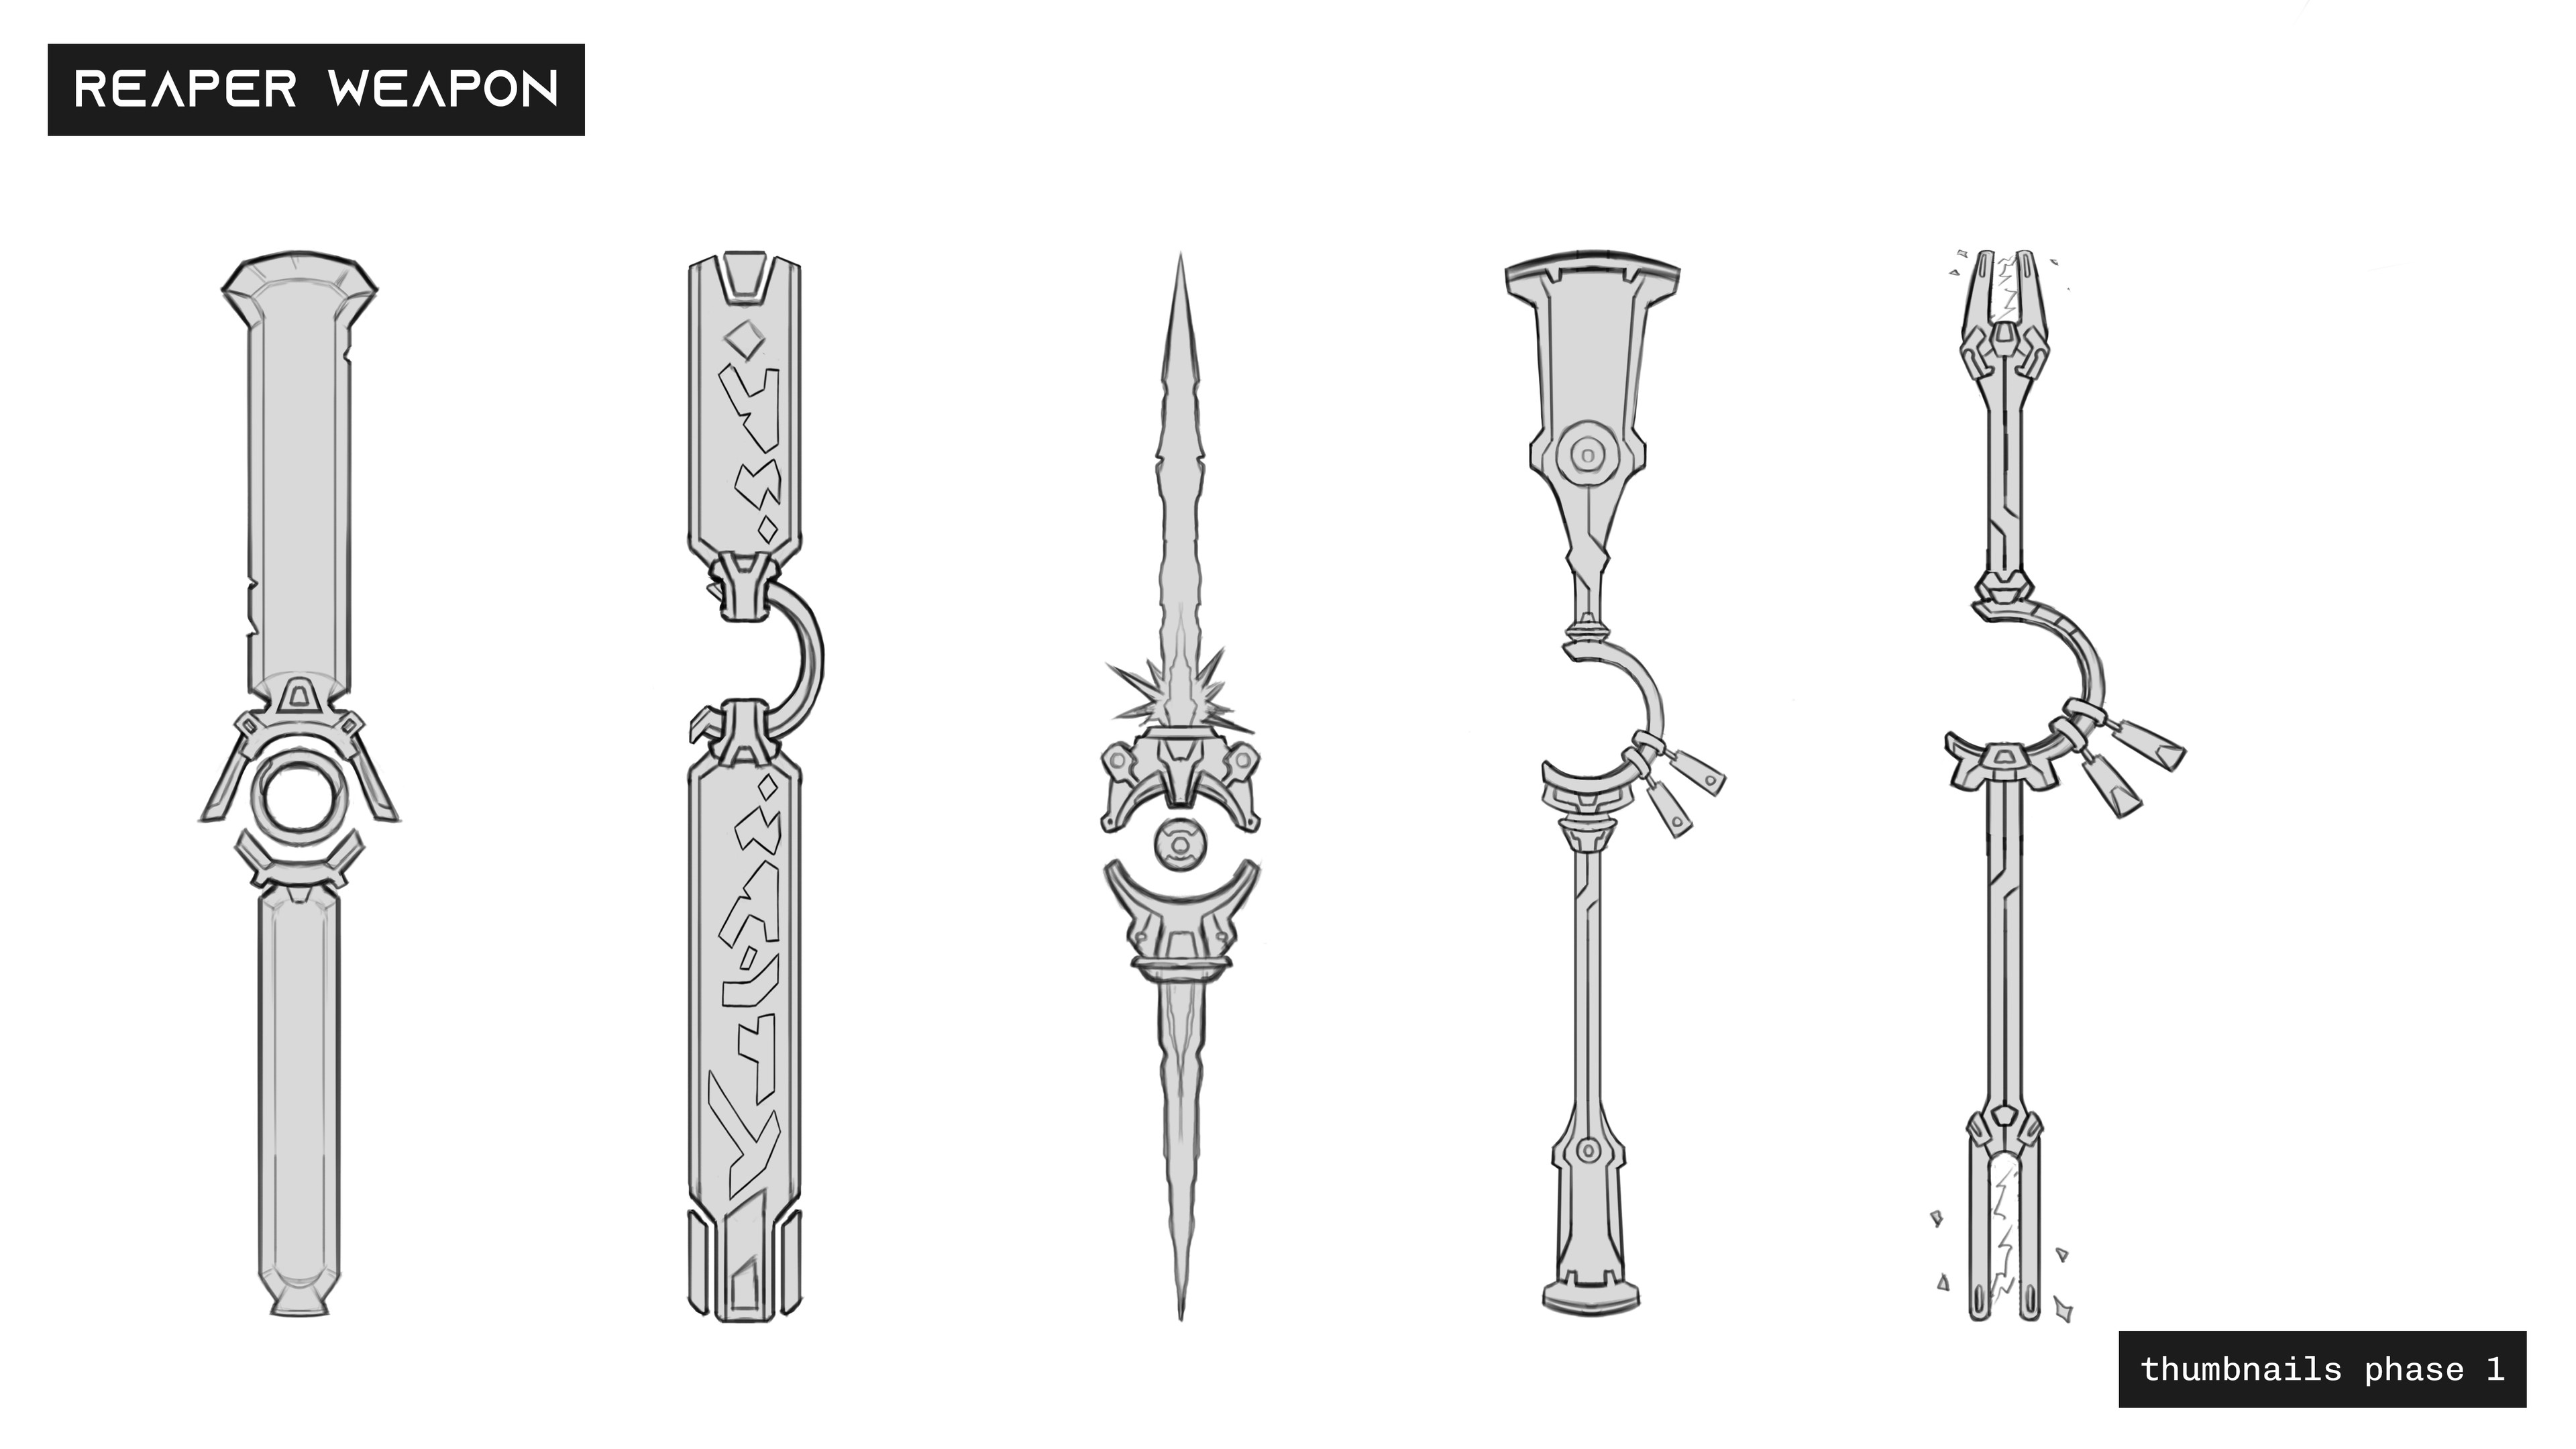 Designs of a floating weapon.